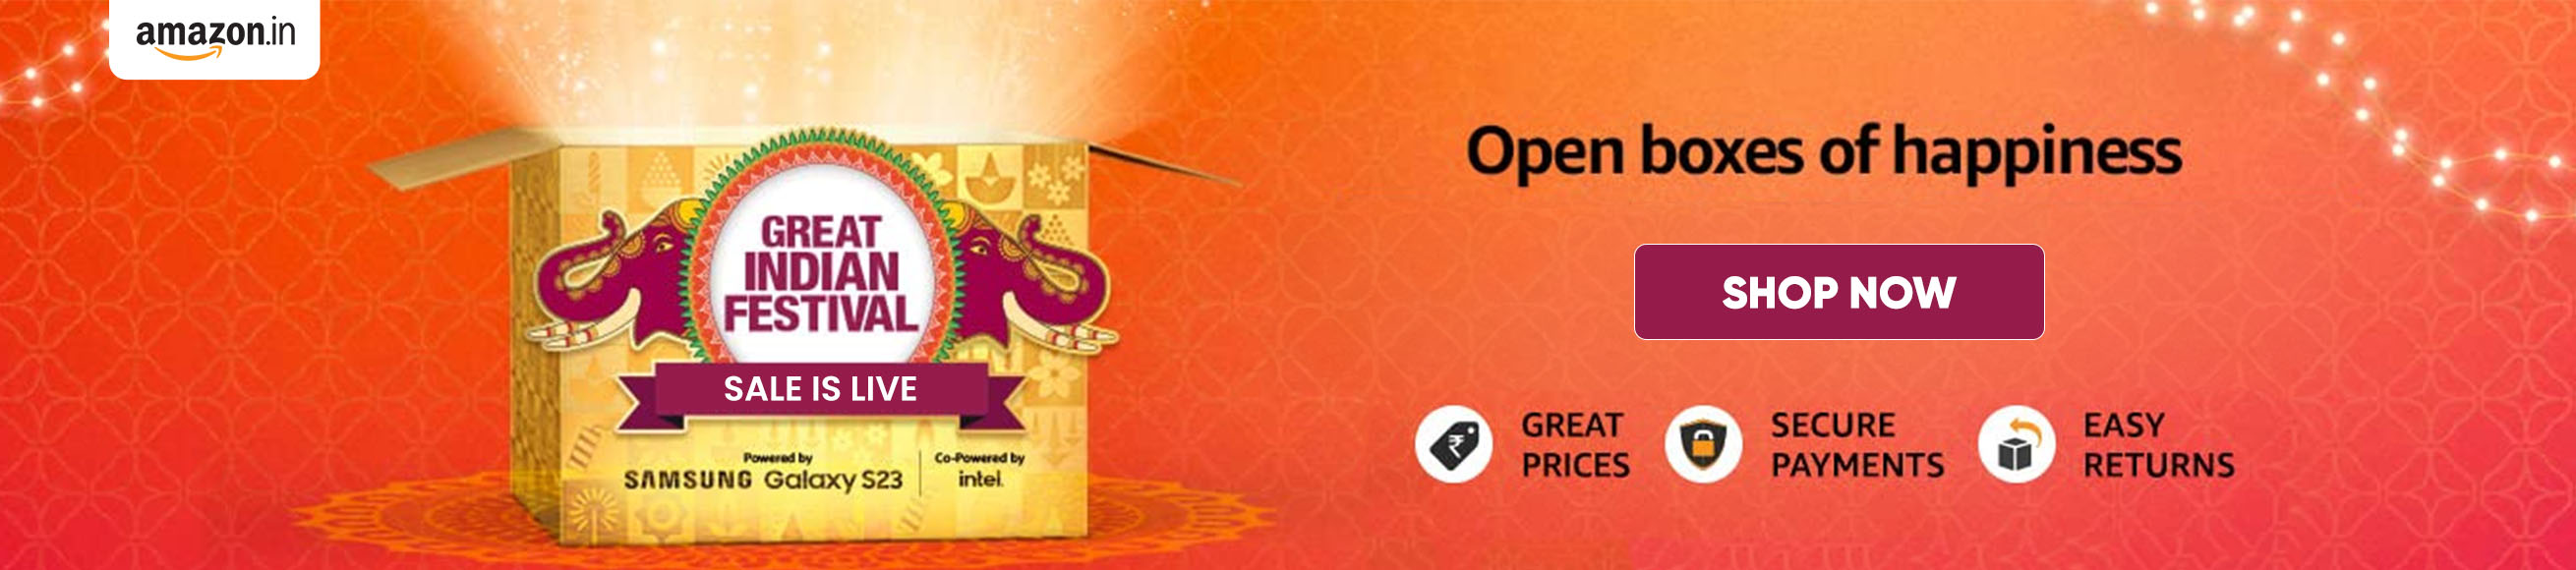 Amazon GREAT INDIAN FESTIVAL Offers on TVs & Large Appliances - (Starts 23rd Sept)